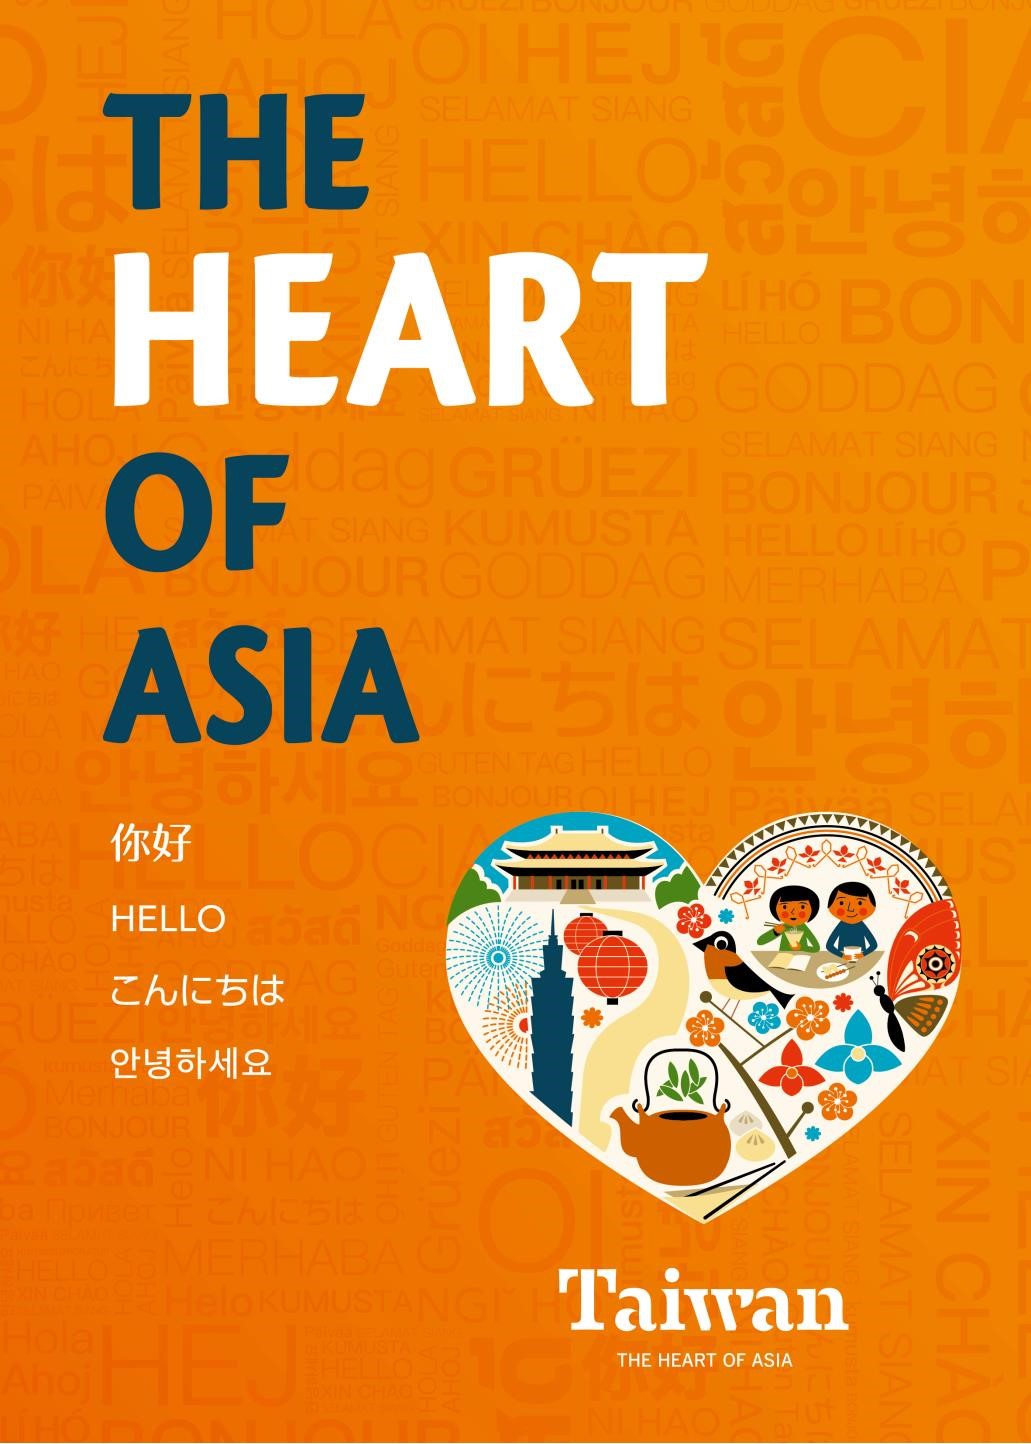 The HEART of ASIA